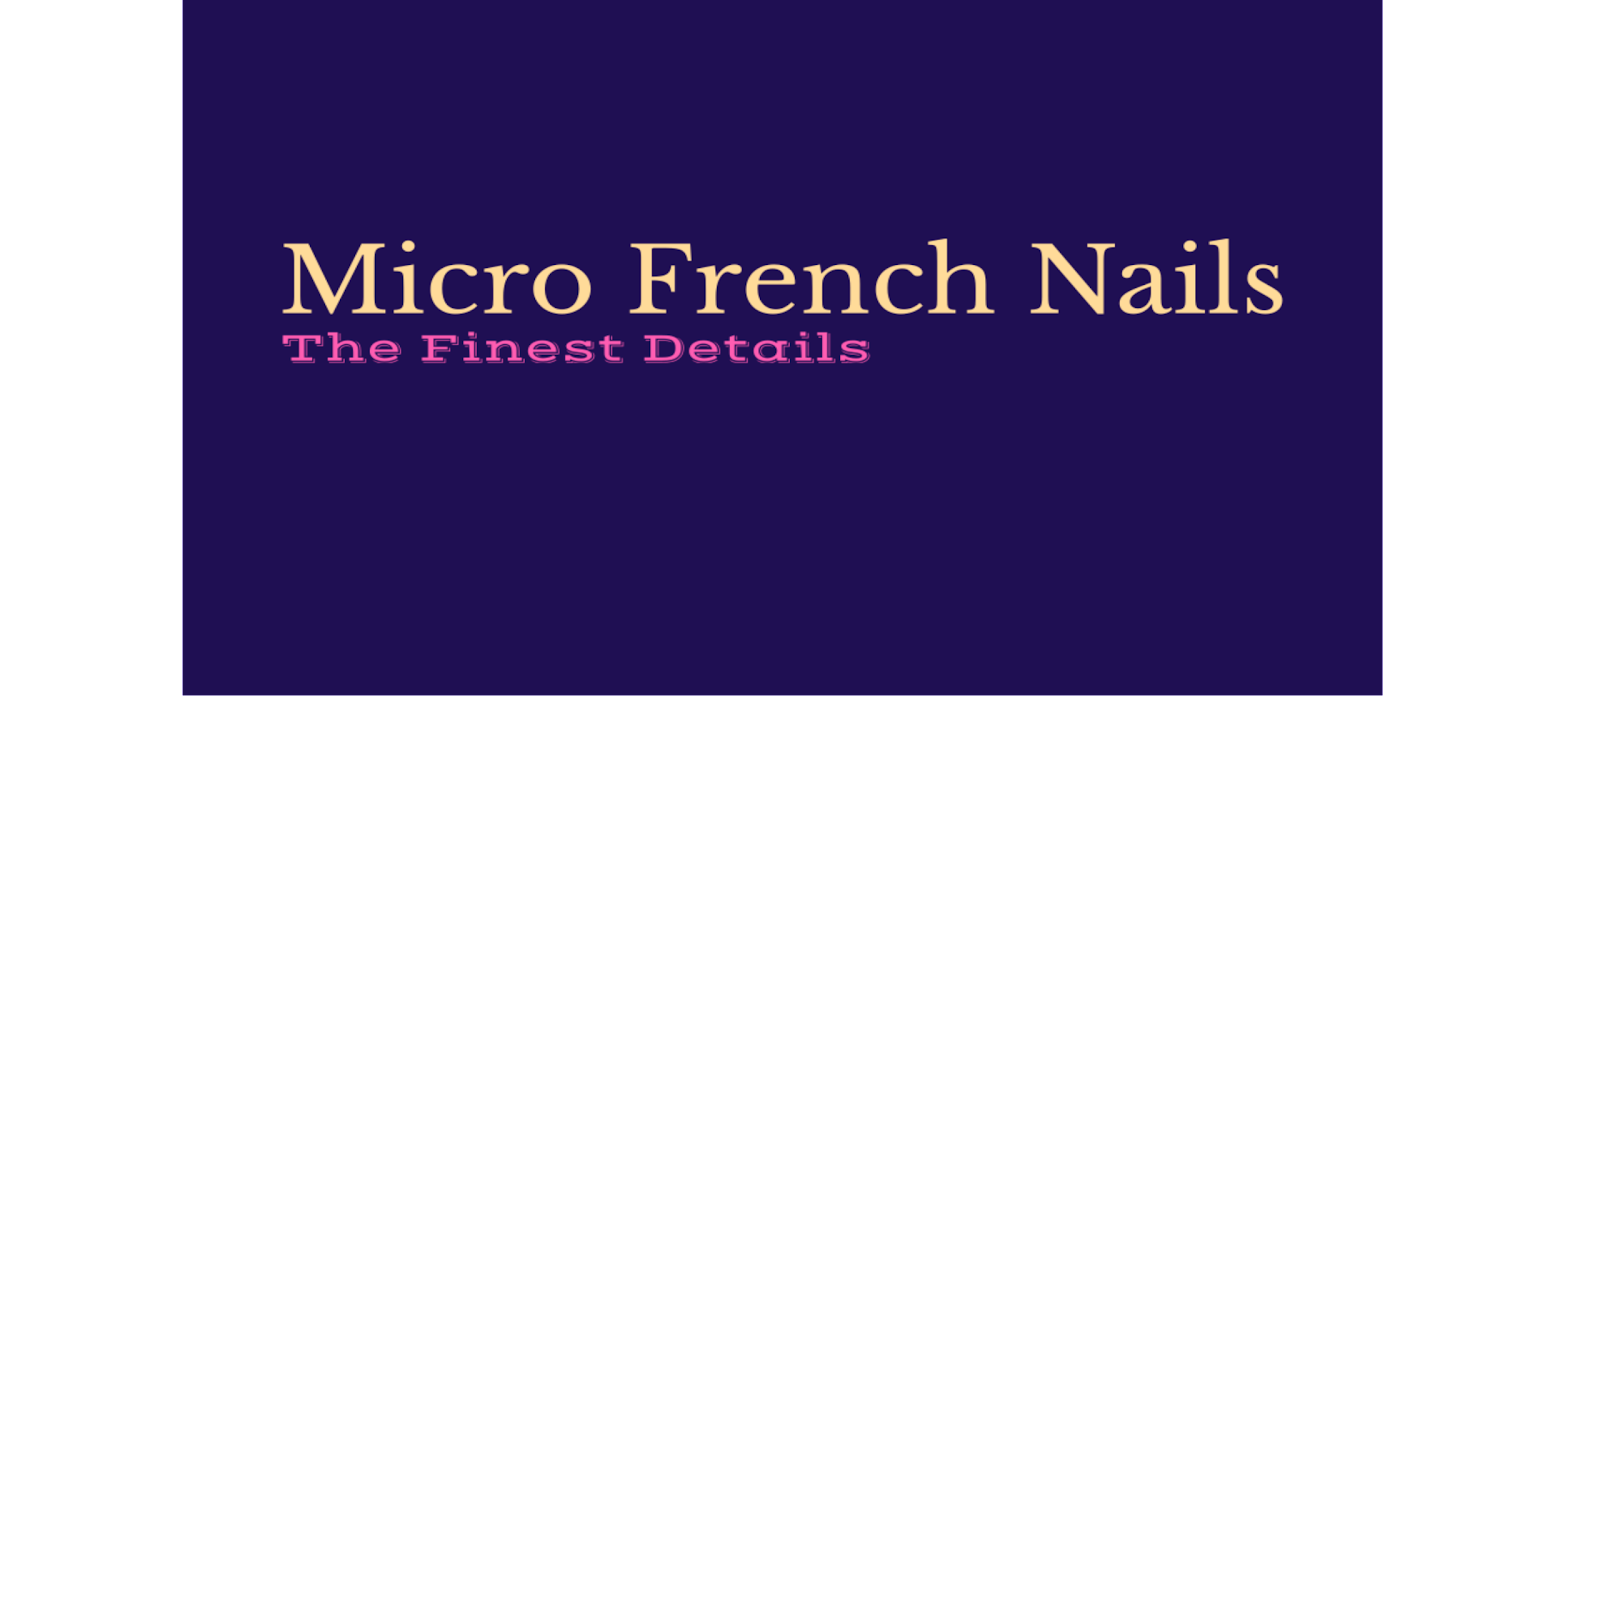 Micro French Nails